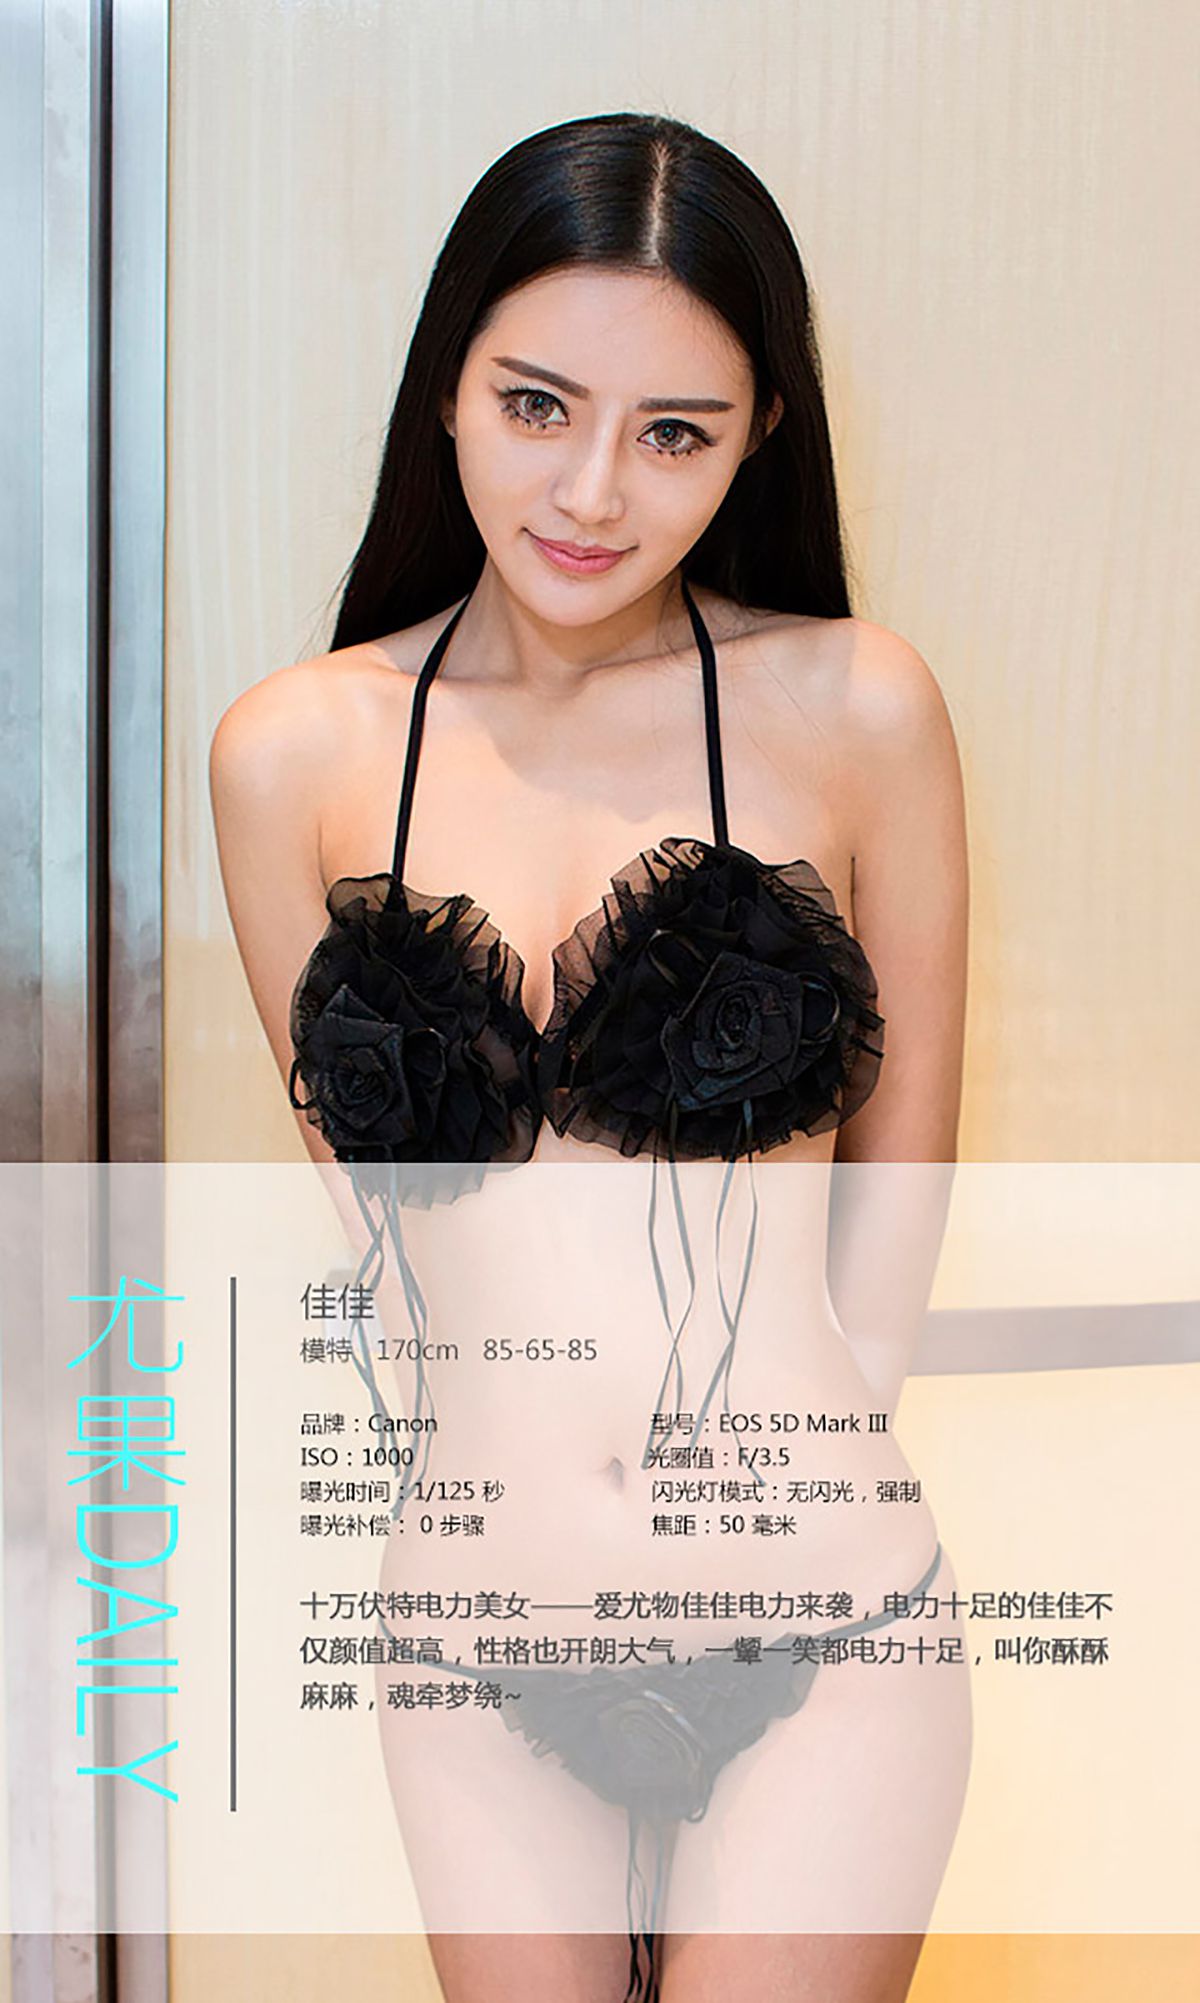 Jia Jia "The Beauty of One Hundred Thousand Volt Electricity" [Love Ugirls] No.075